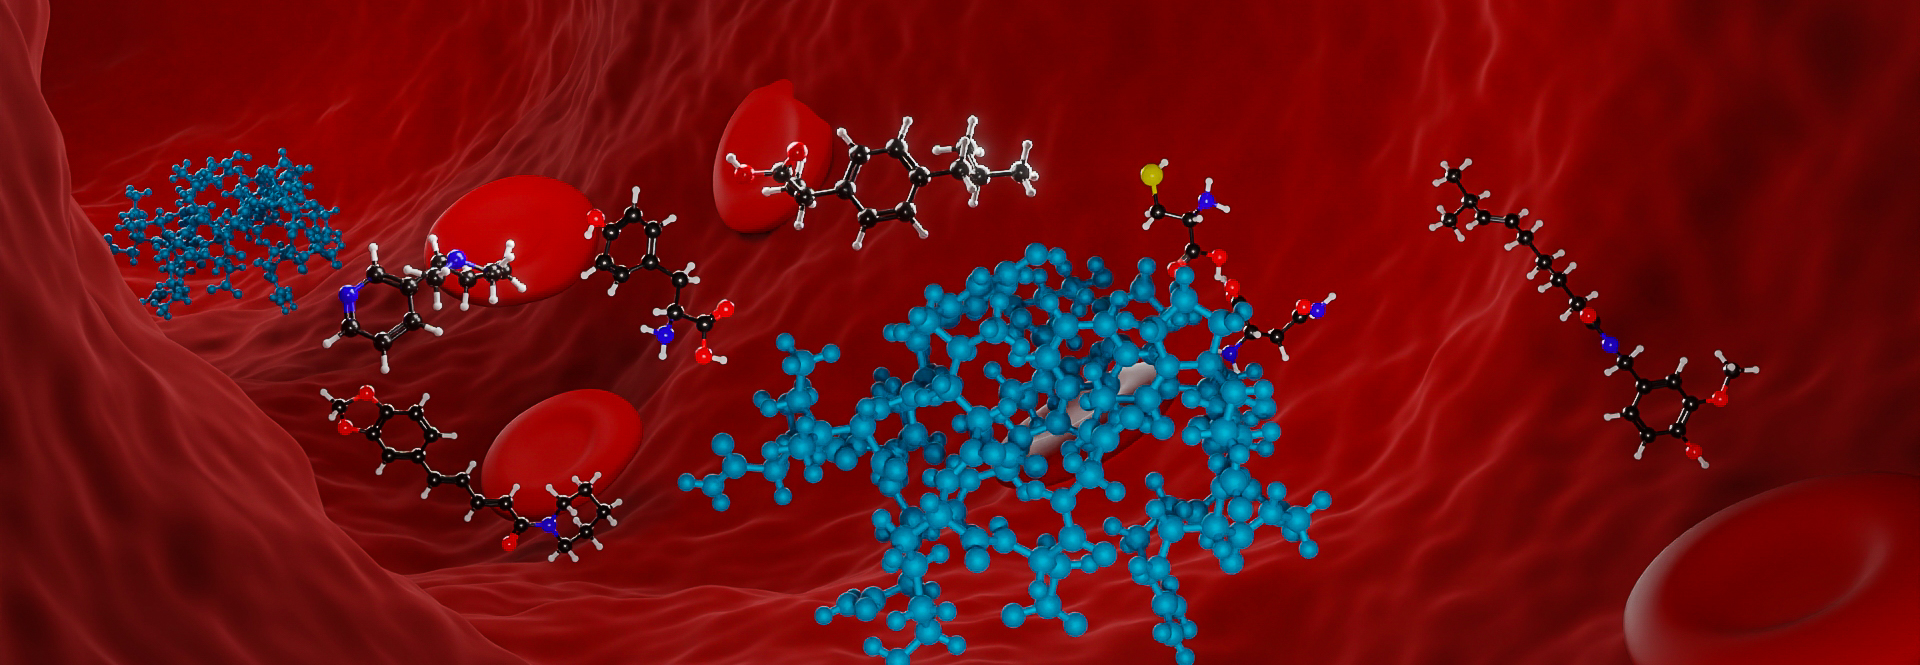 3d render of chemical structures of aminoacid chains and metabolites in a red blood vessel generated by Biofidus AG